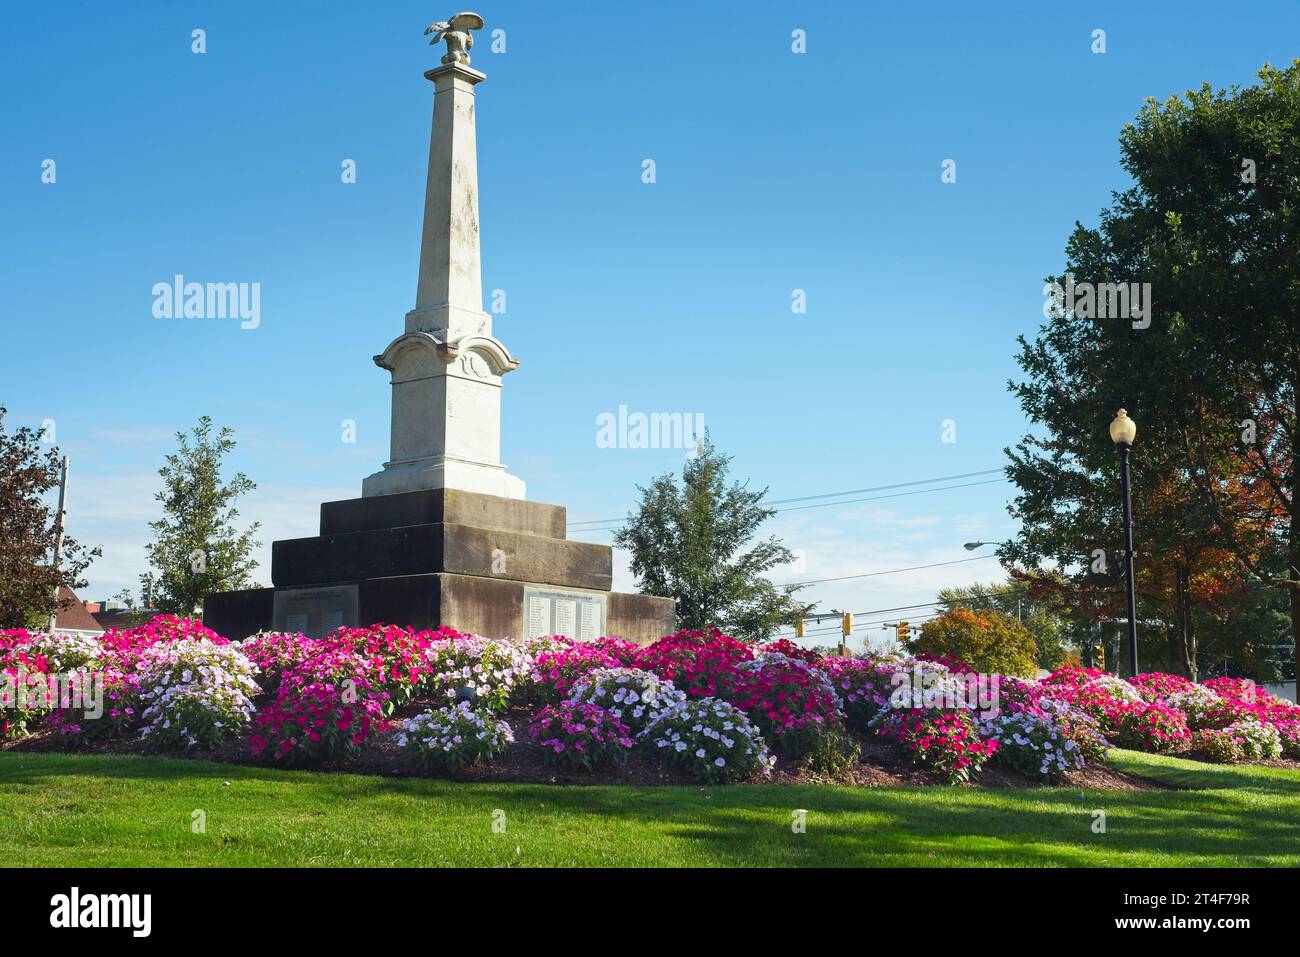 Clusters of vibrant petunias surround the Civil War monument in Twinsburg, Ohio, on the town square. Stock Photo